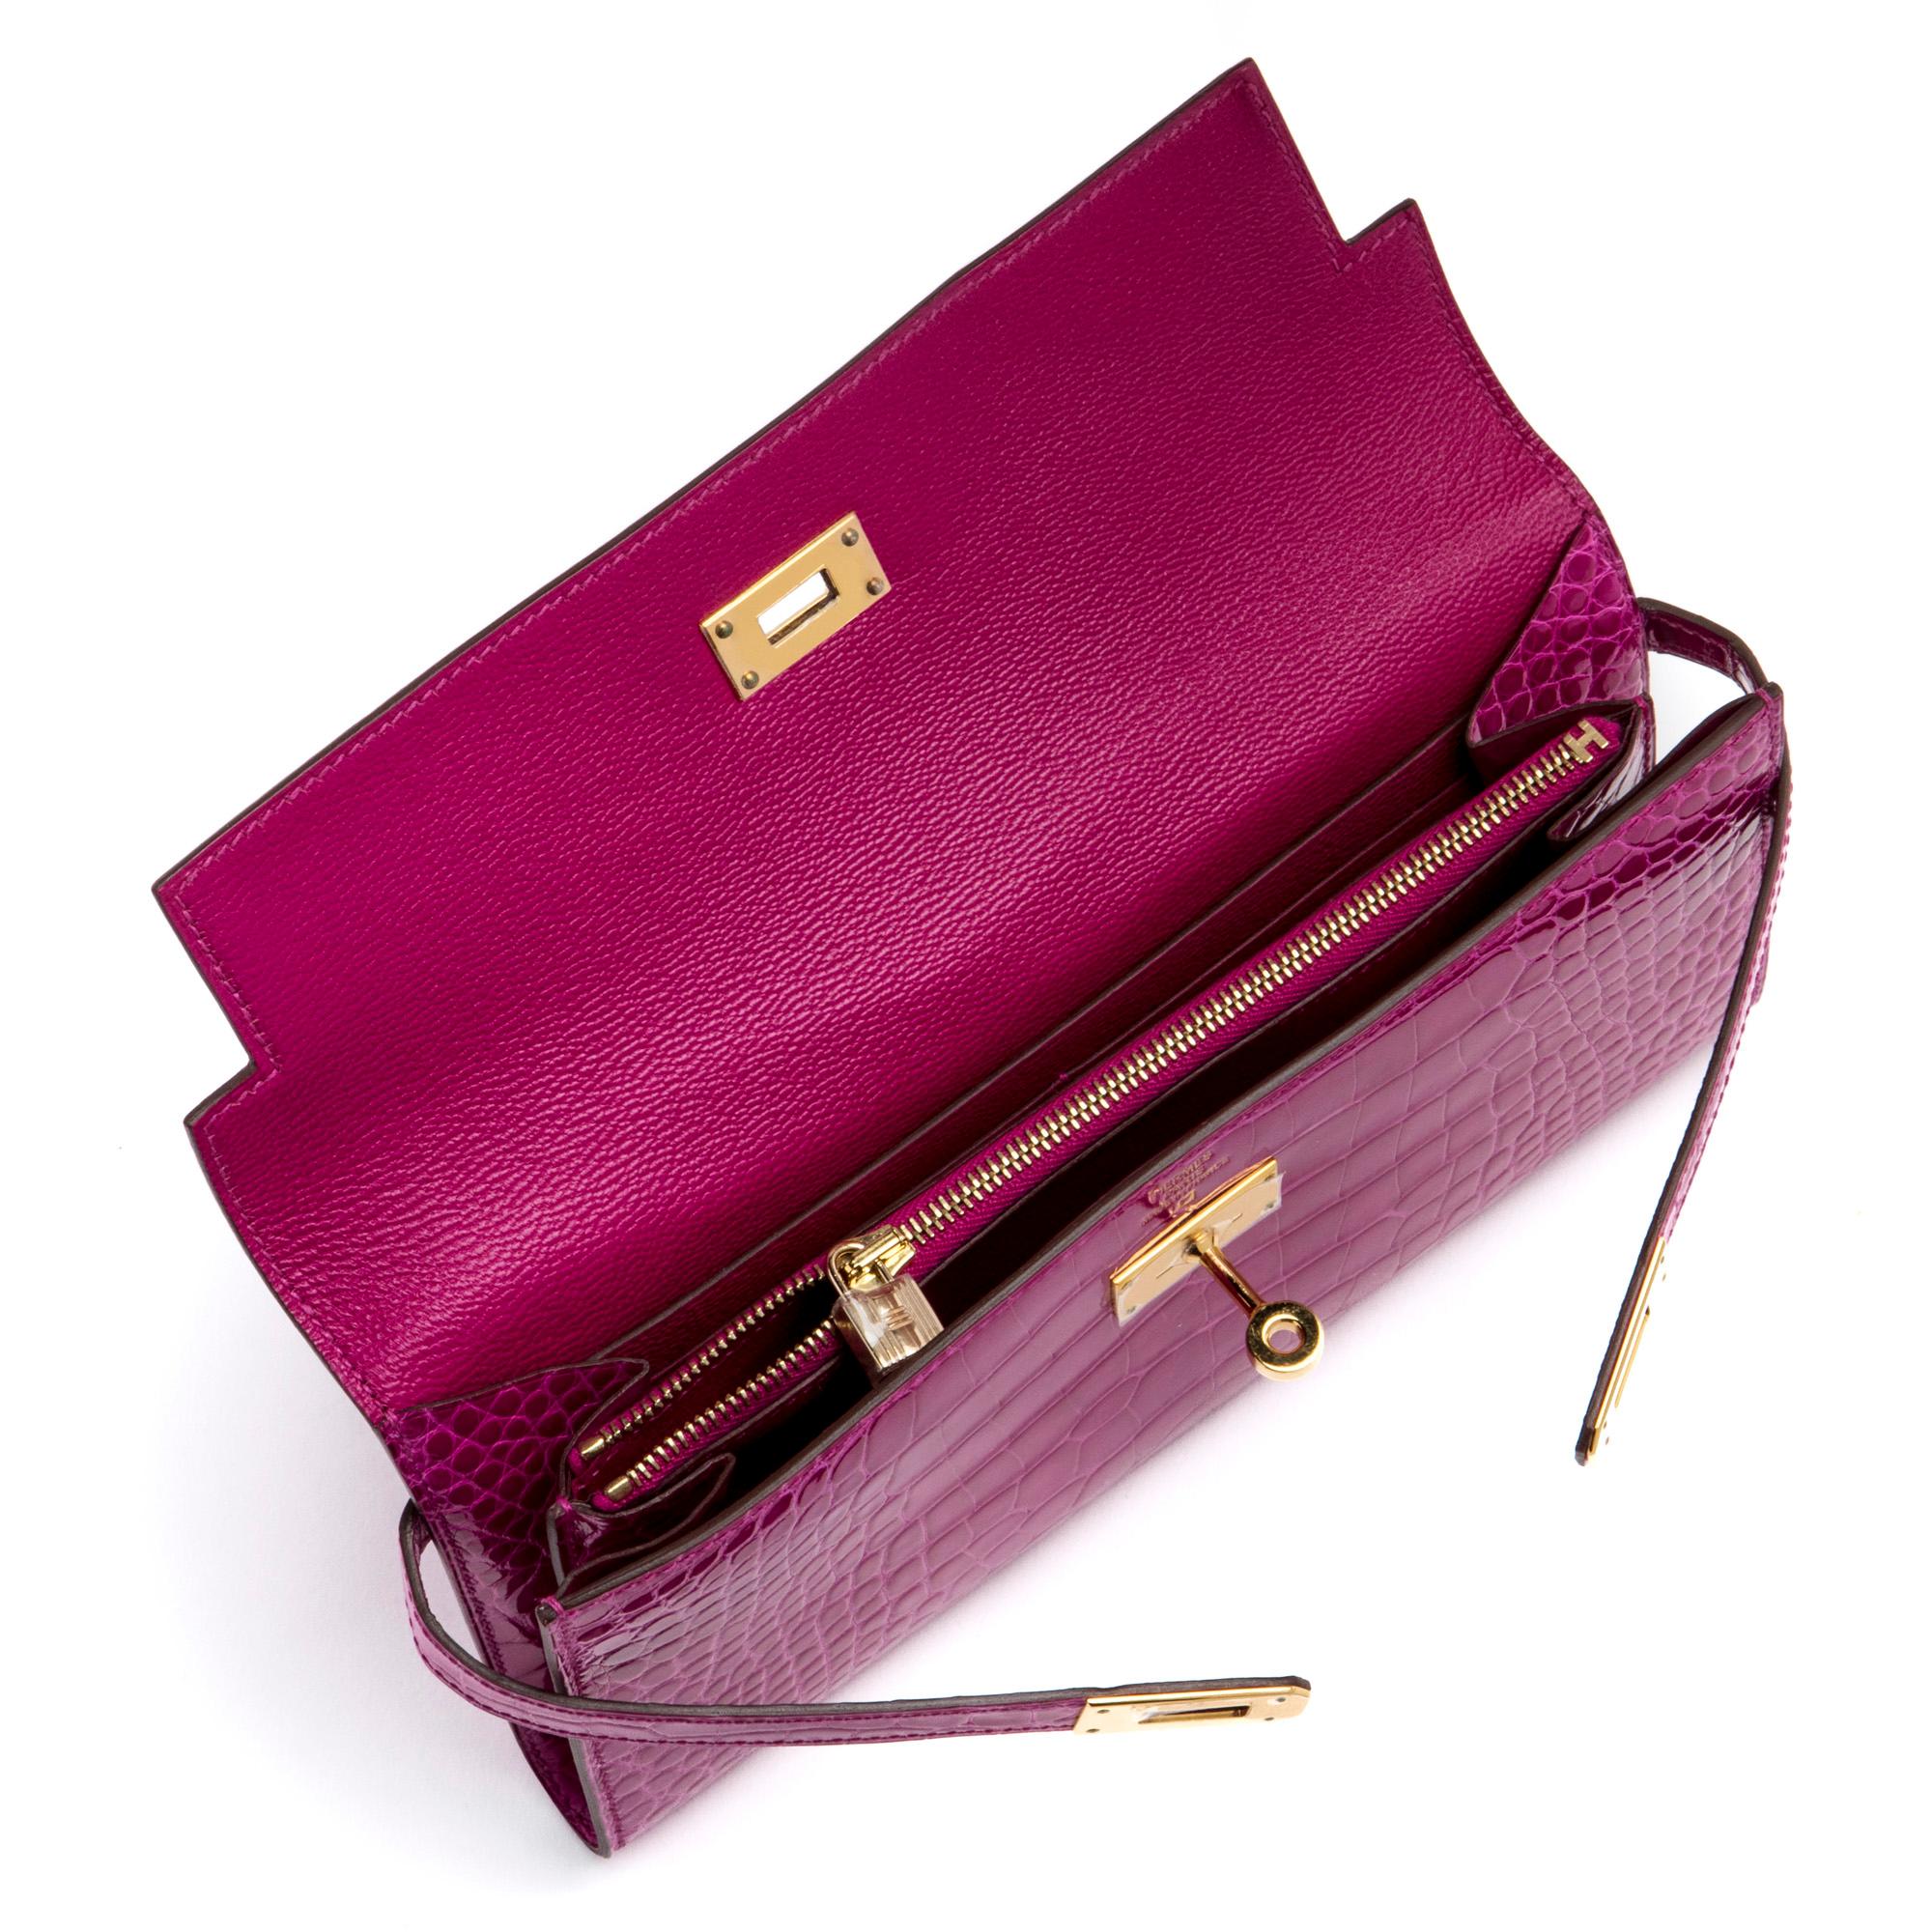 Hermés Rose Sheherazade Alligator Clutch In Excellent Condition For Sale In New York, NY